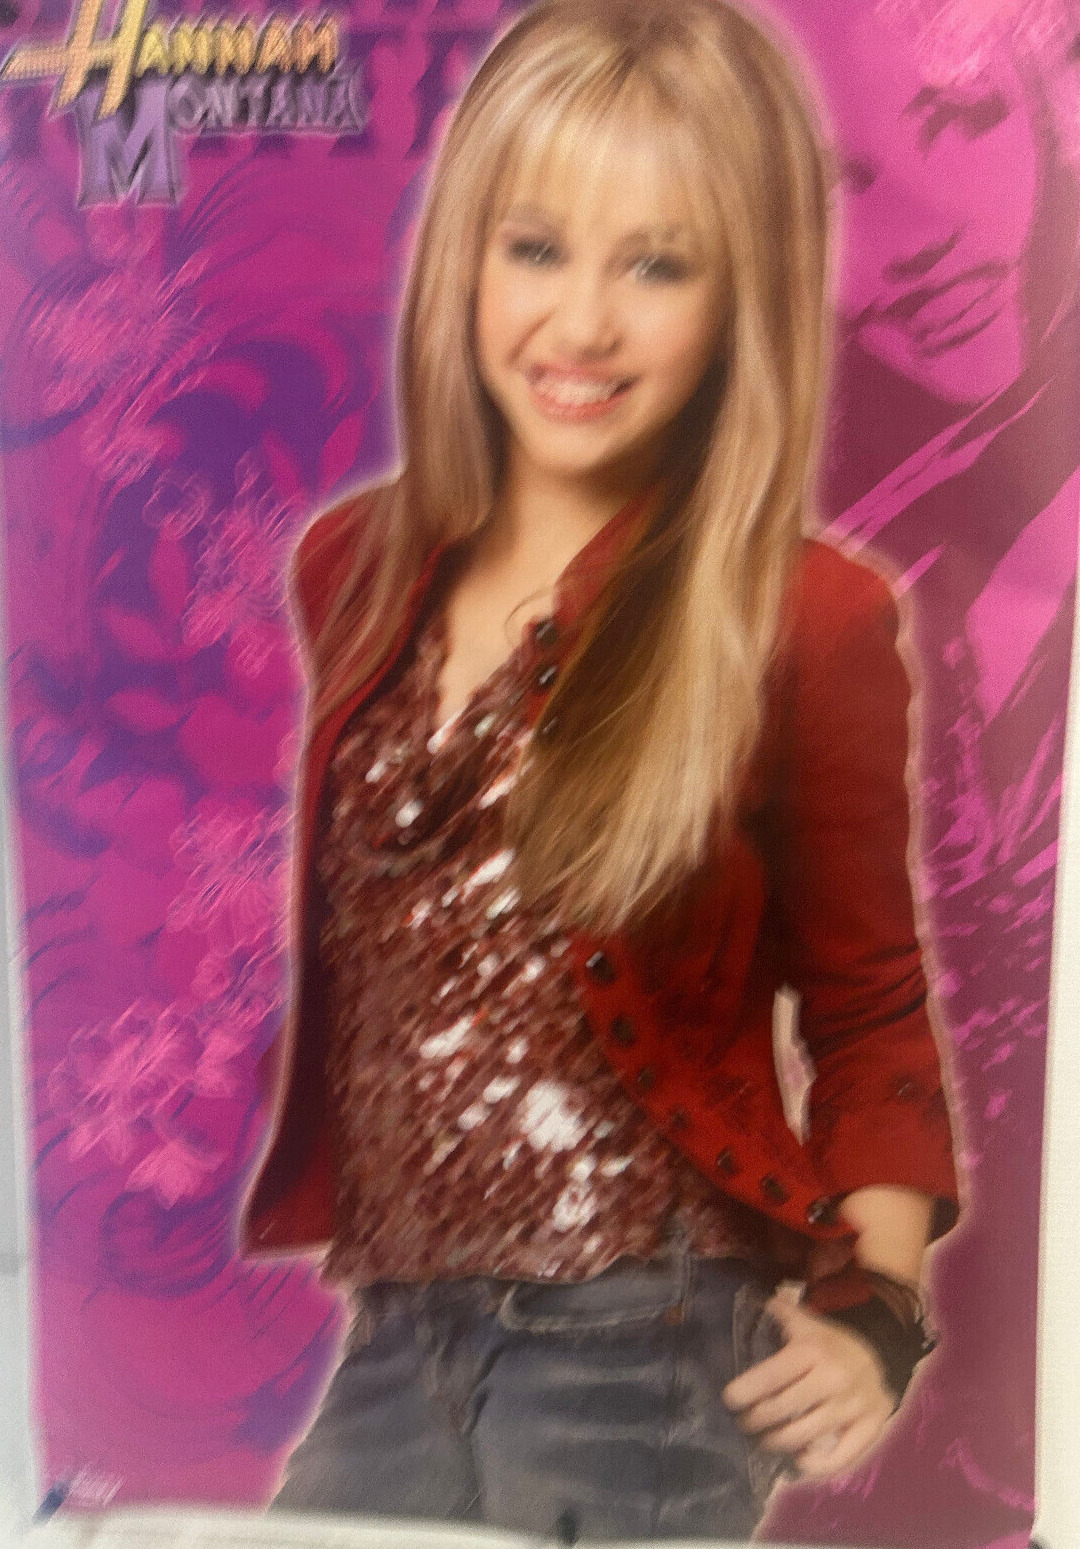 ROLLED VINTAGE HANNAH MONTANA STAR MILEY CYRUS 22X34 POSTER TRENDS CANADA